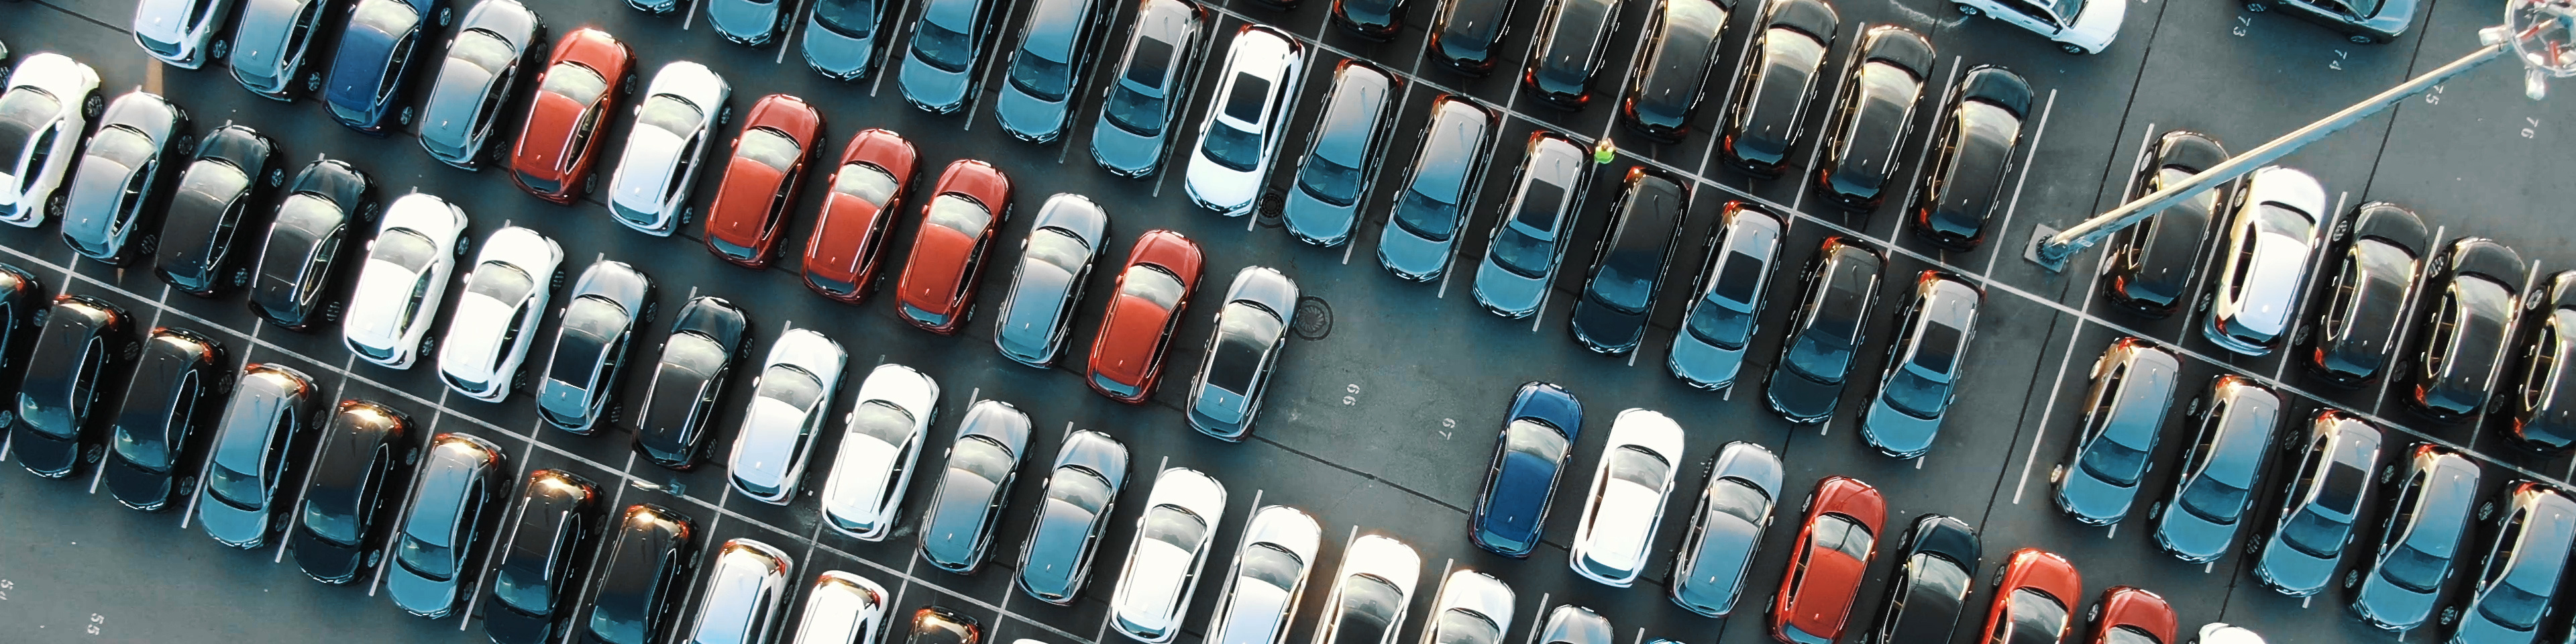 parked cars